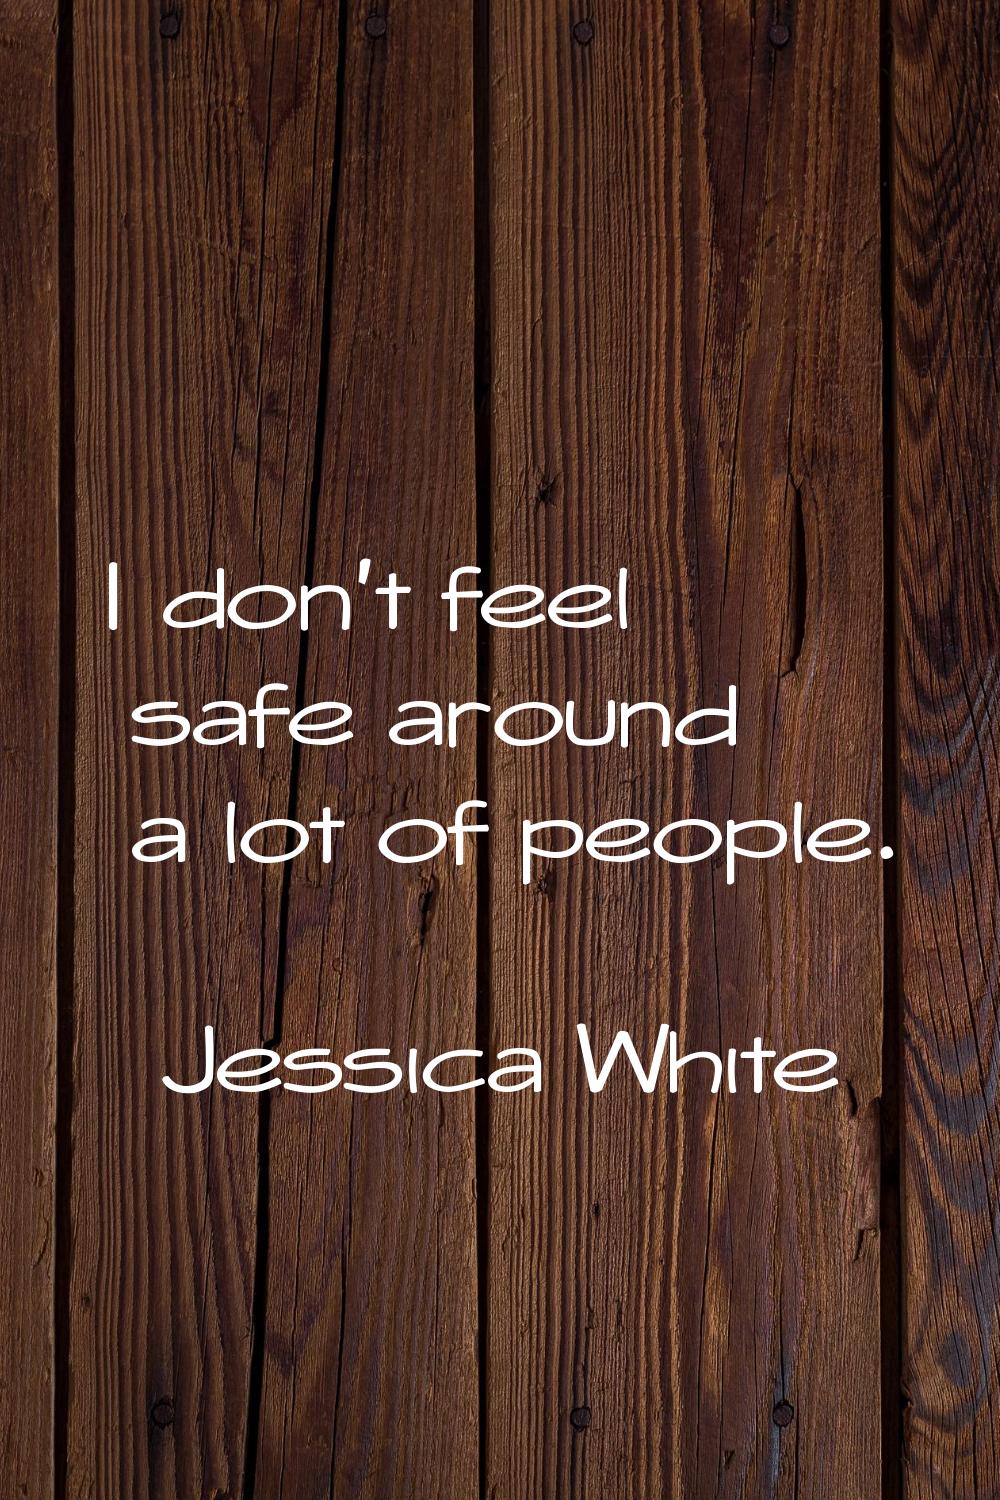 I don't feel safe around a lot of people.